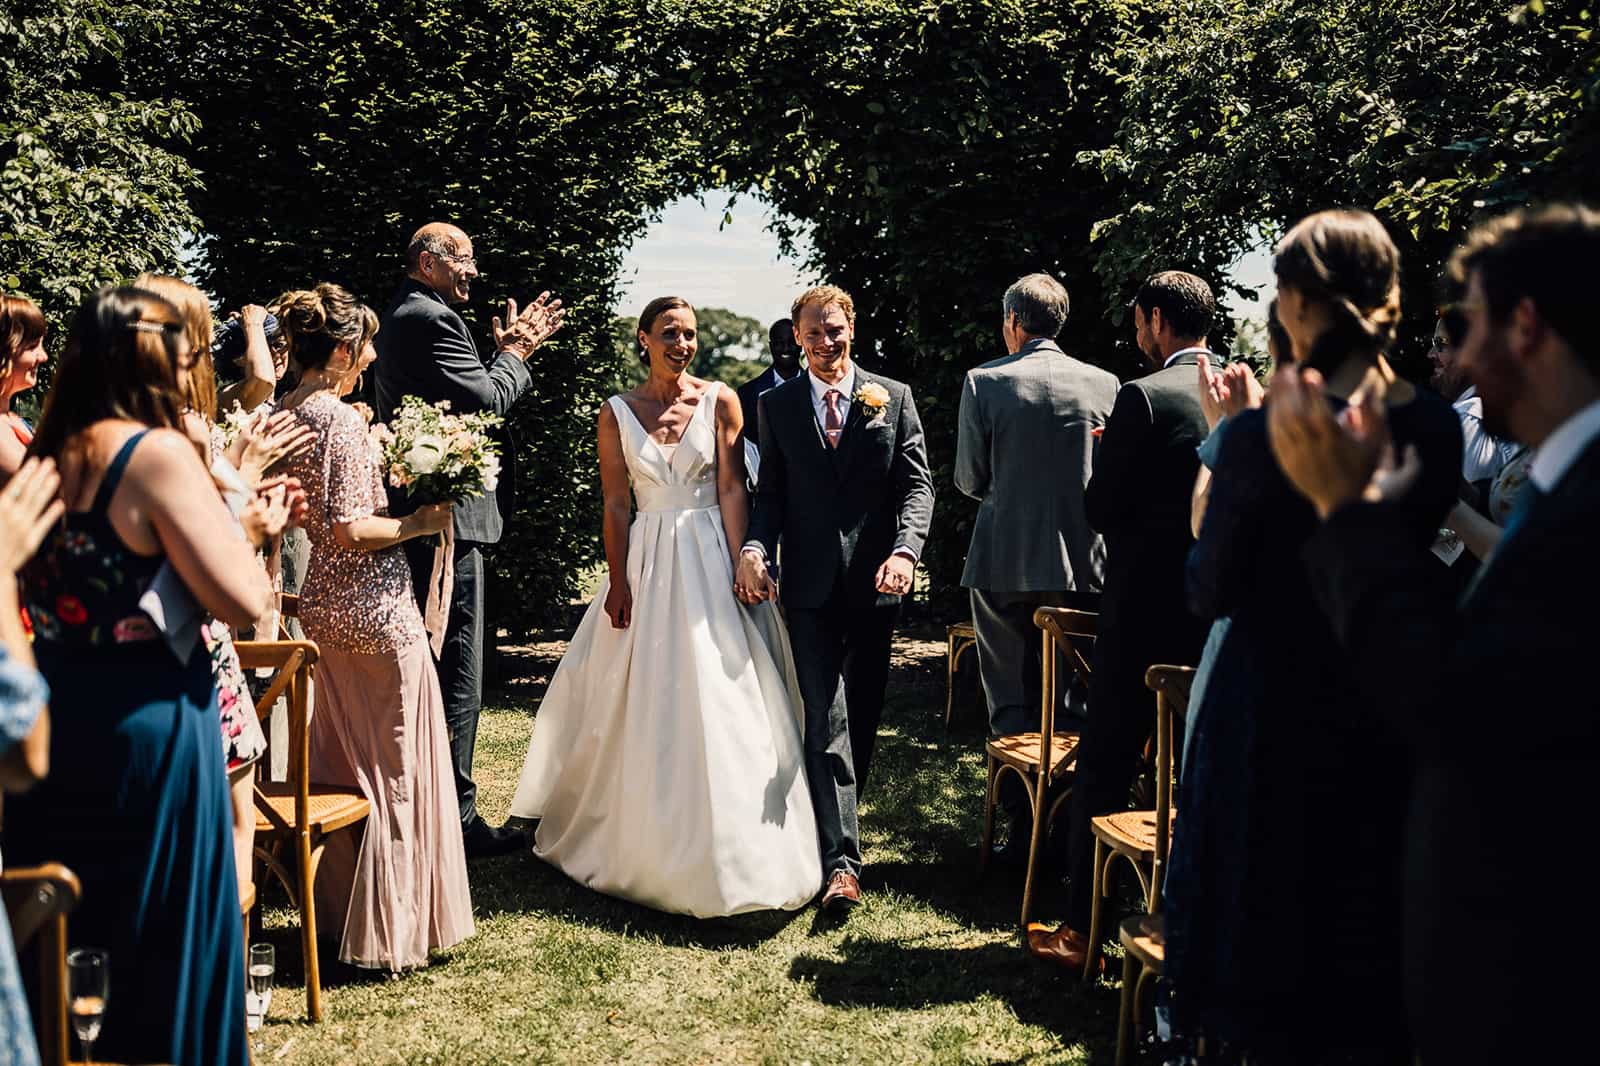 A petite Mid-Week Wedding For 30 This Summer